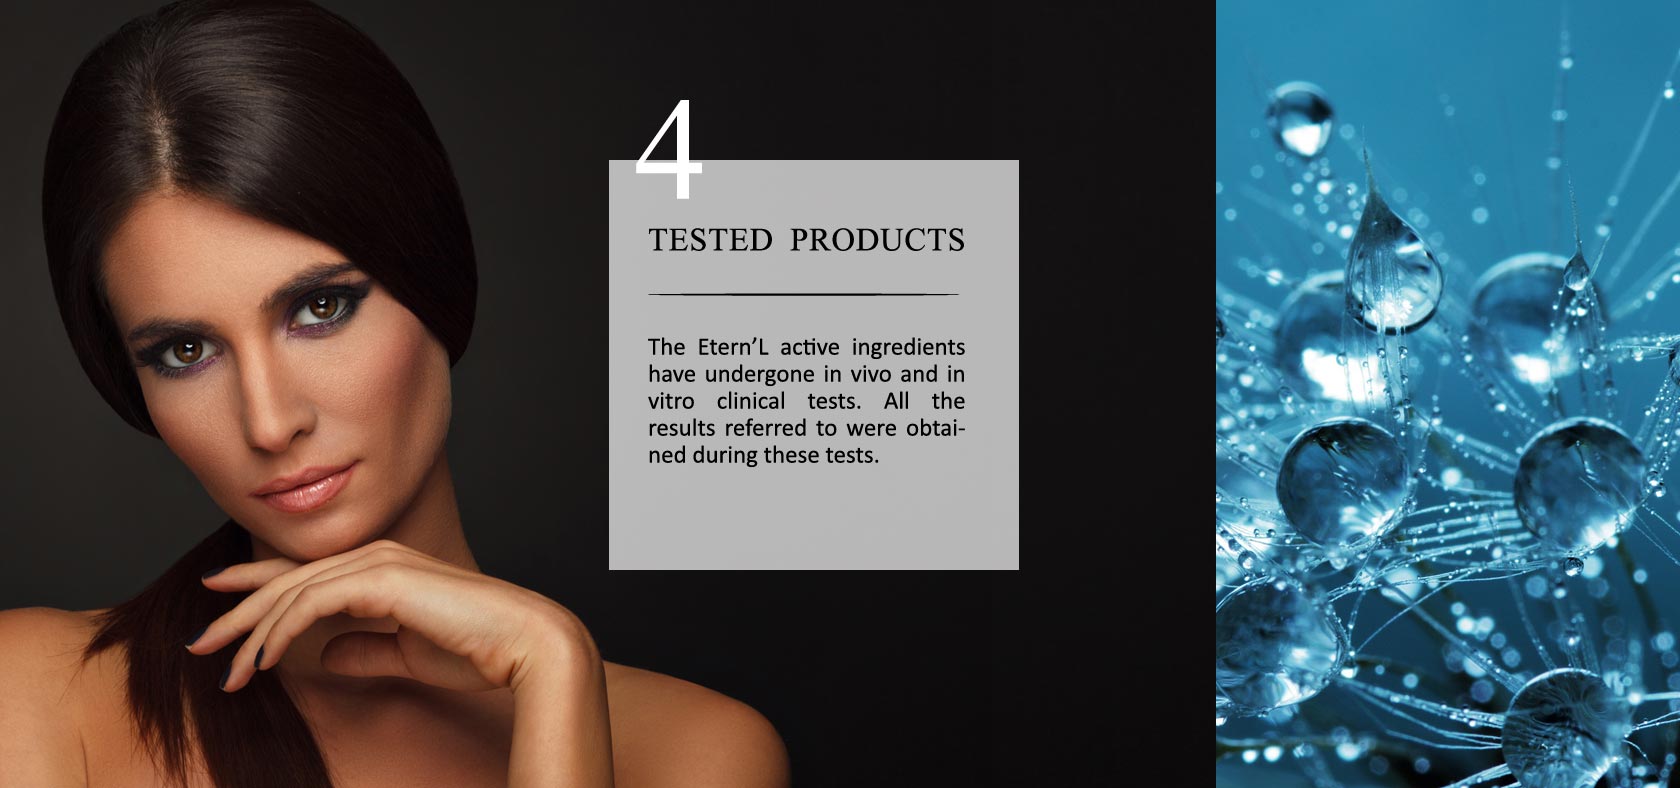 Éternel commitment #4: tested products